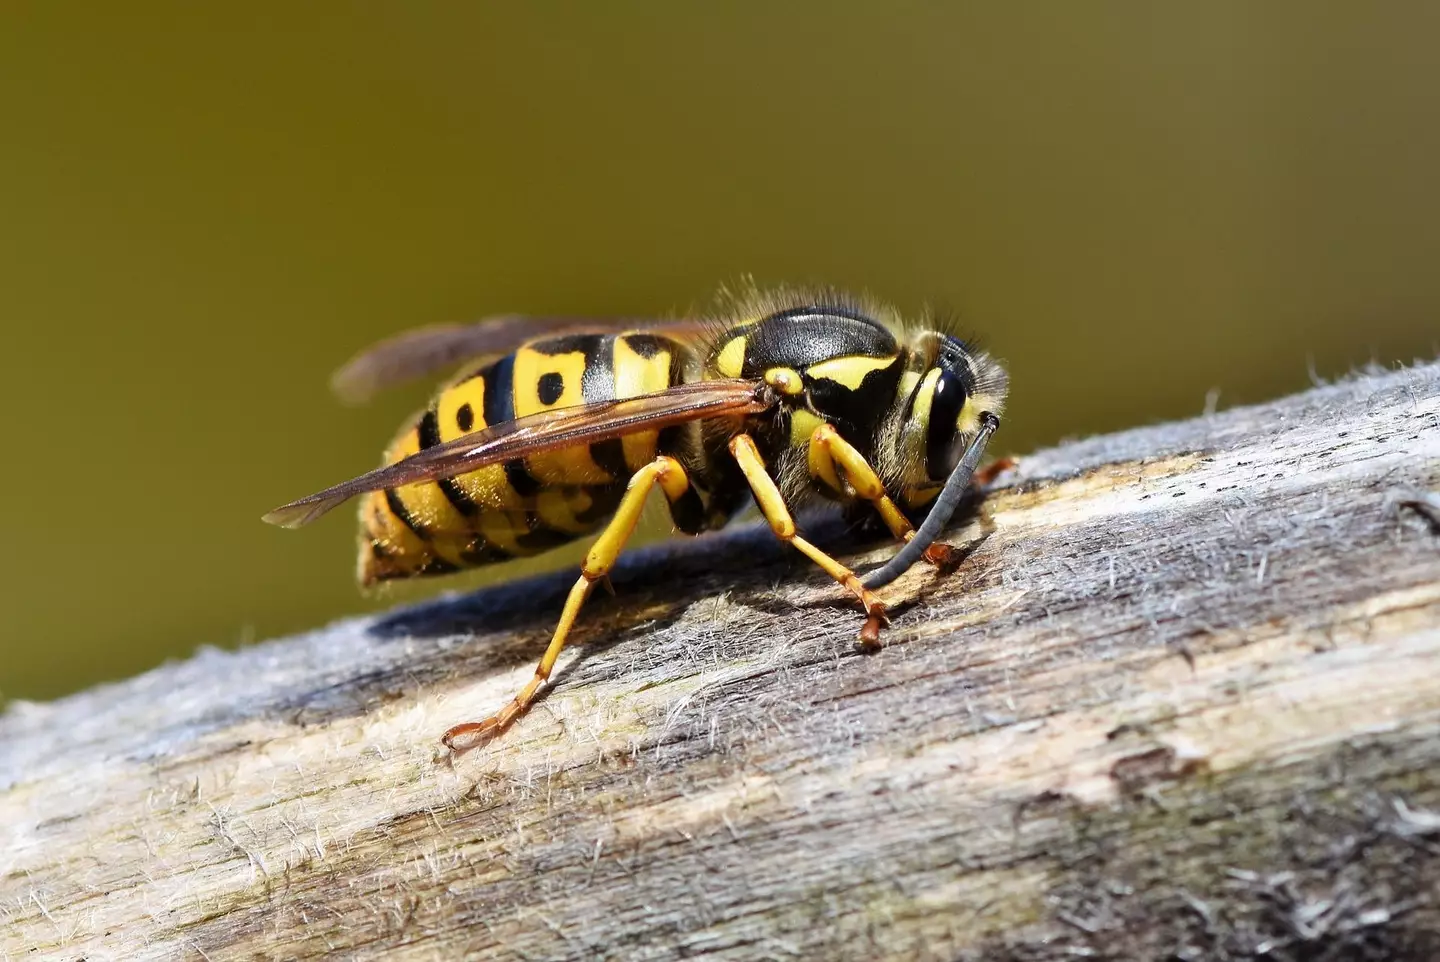 A swarm of wasps is expected in the UK thanks to the warmer temperatures.